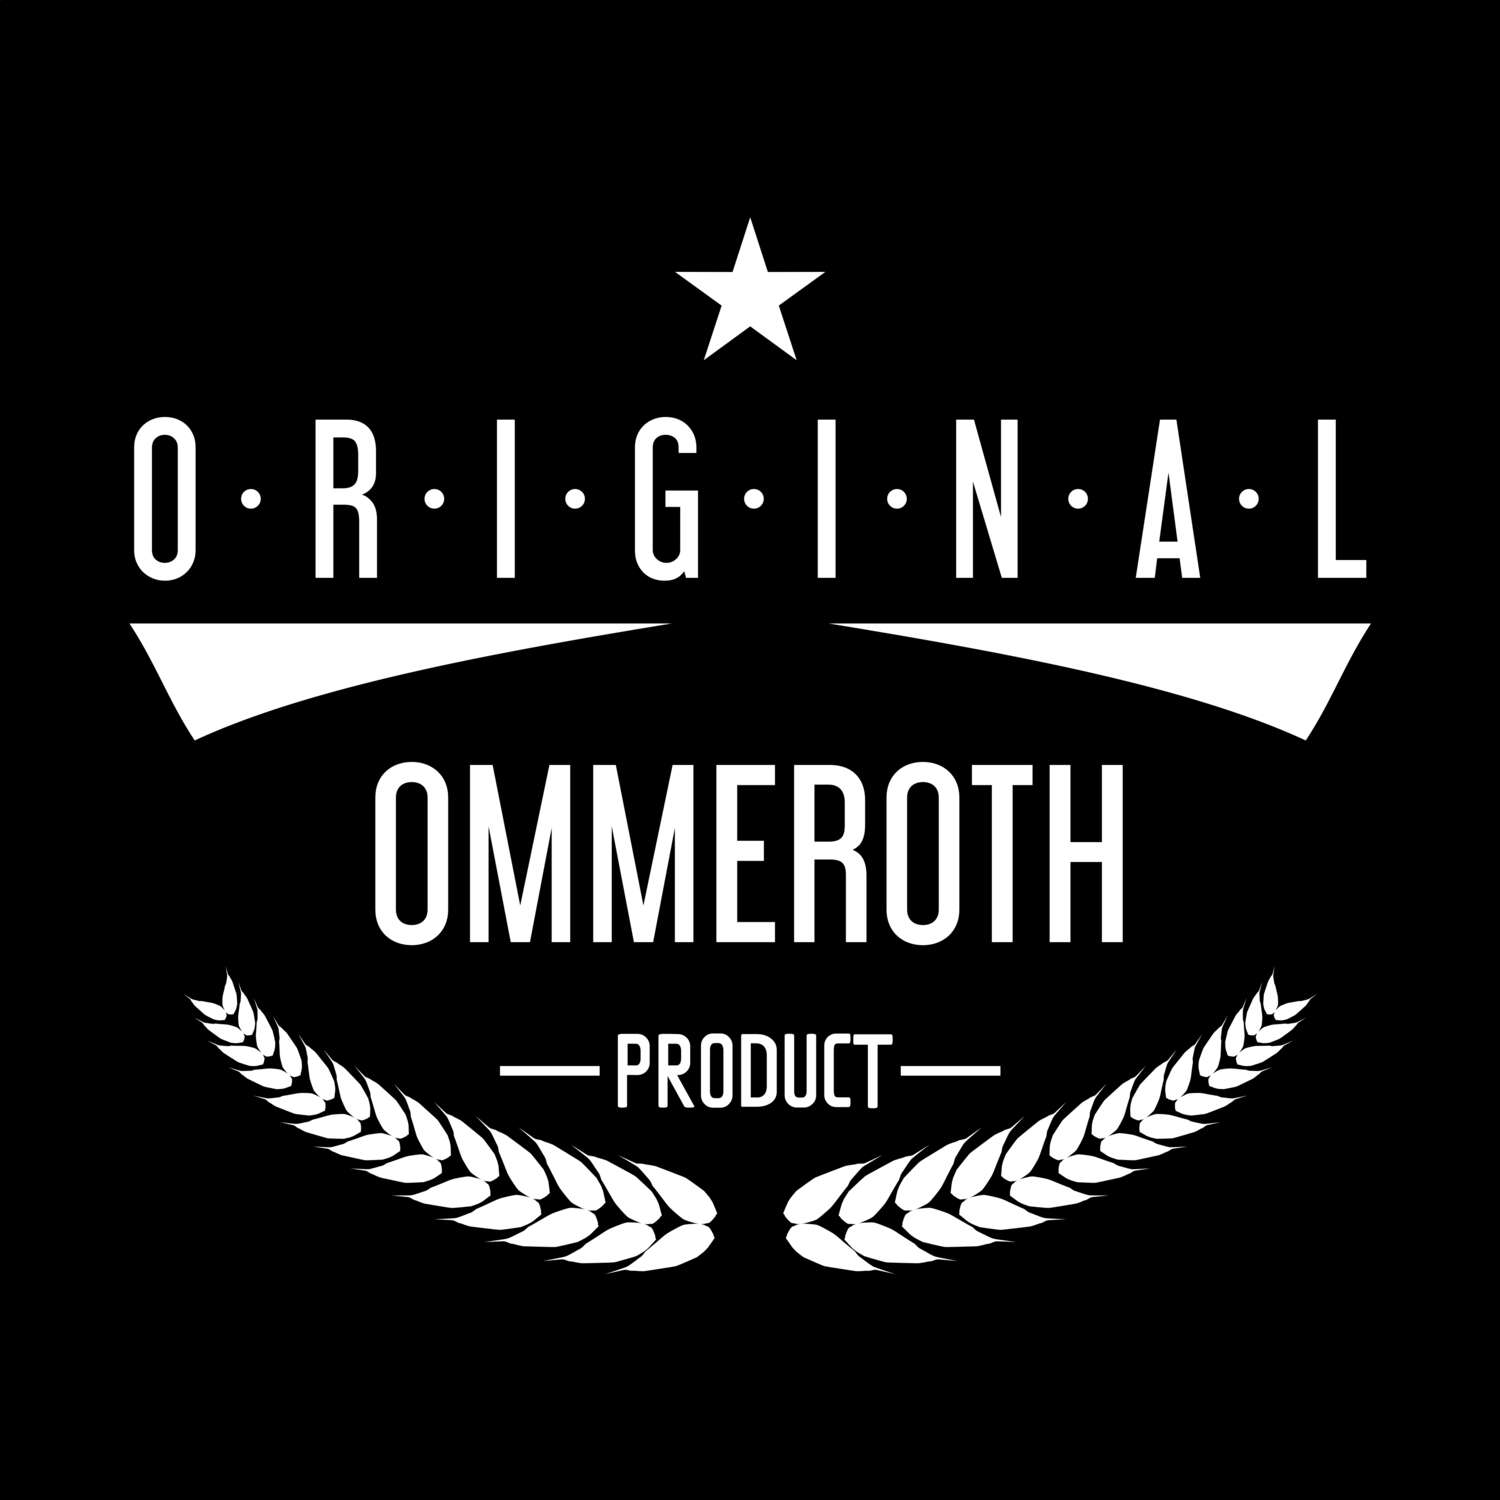 Ommeroth T-Shirt »Original Product«